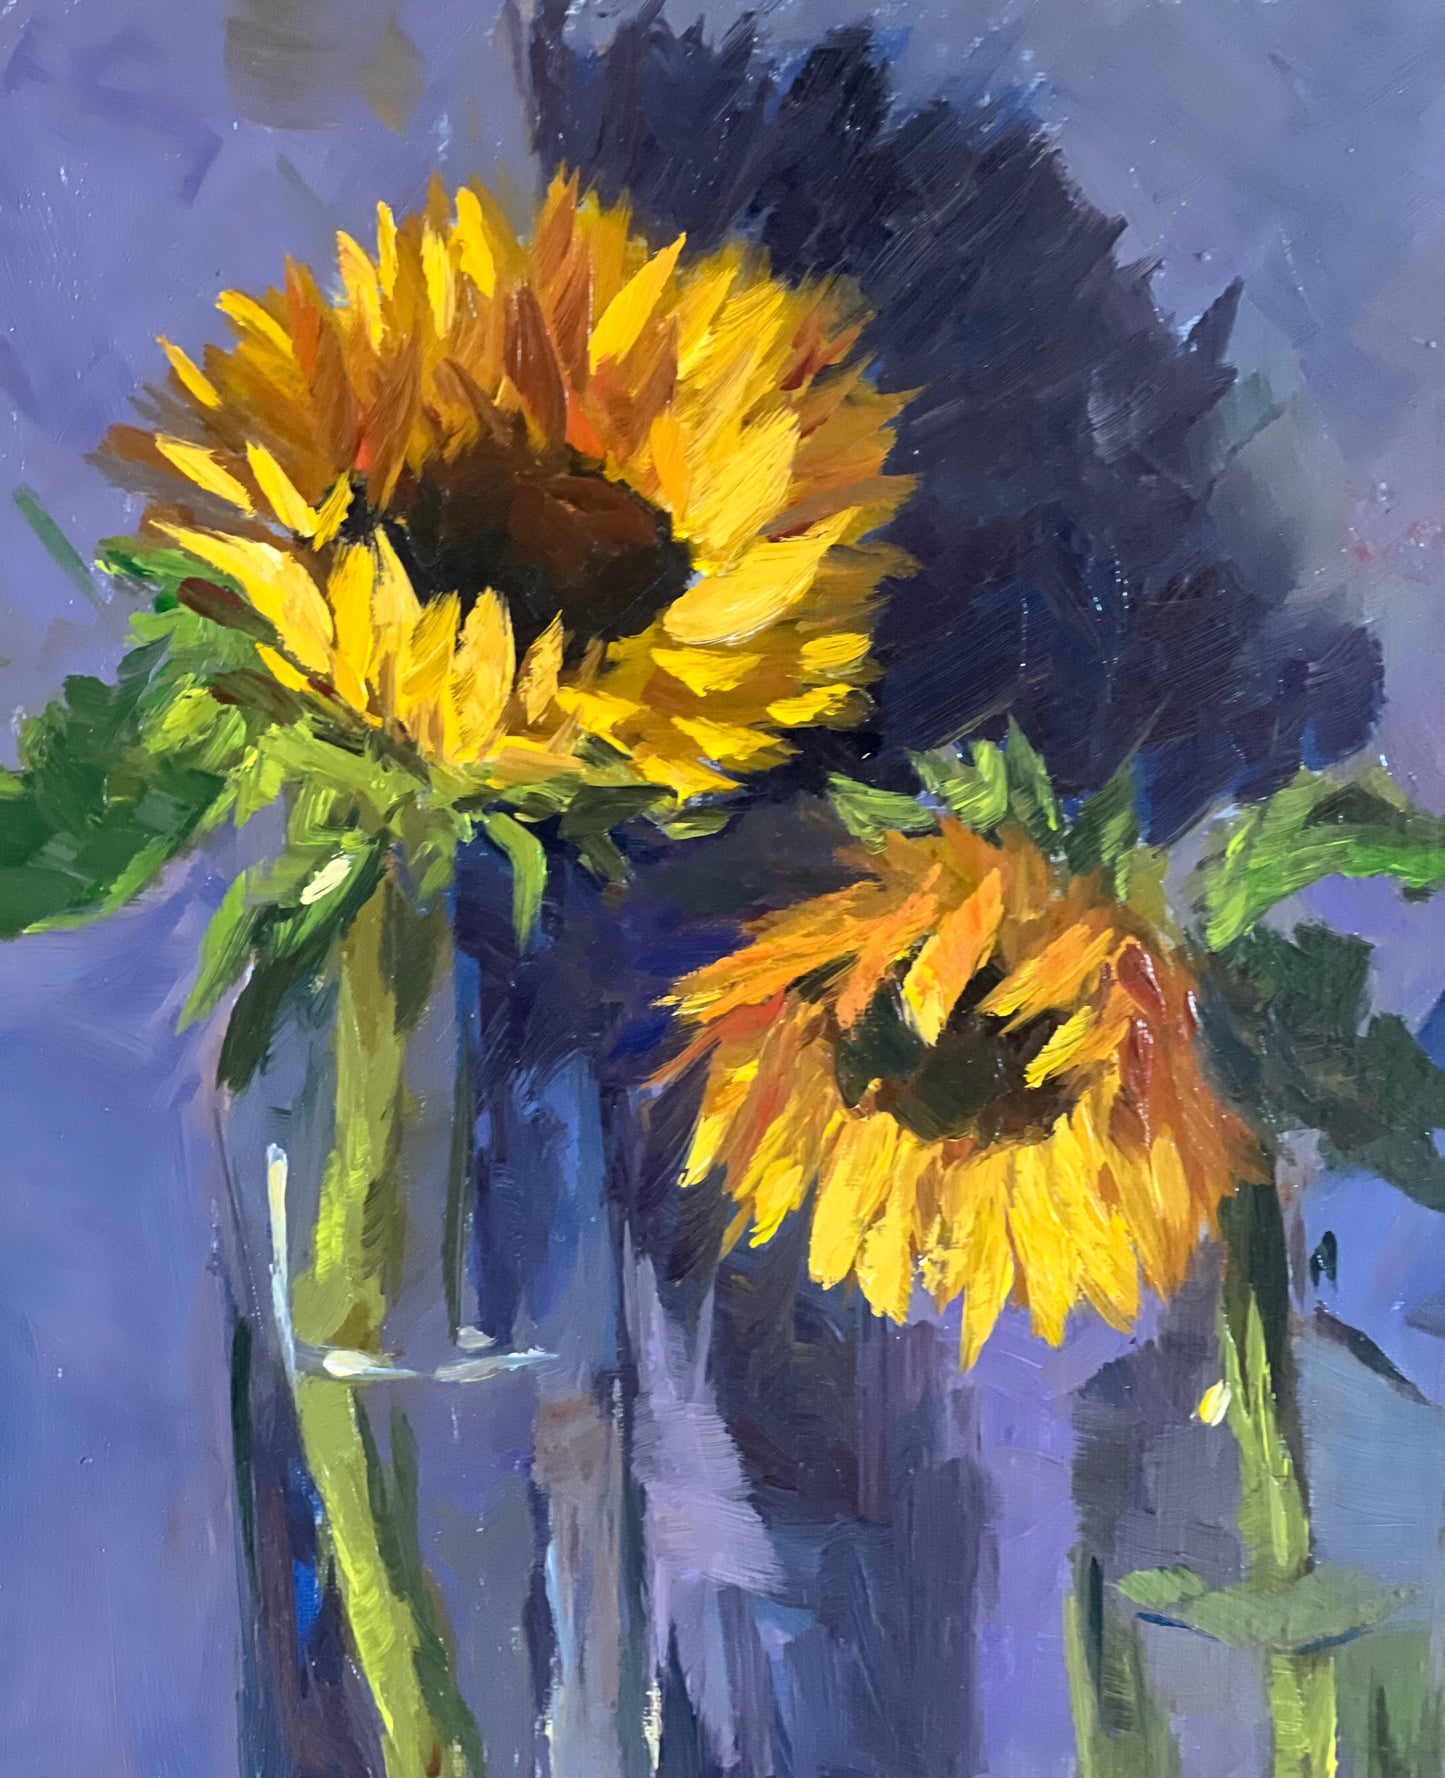 Sunflower Series 7 - Original Stilllife Painting, 8 by 12 inches